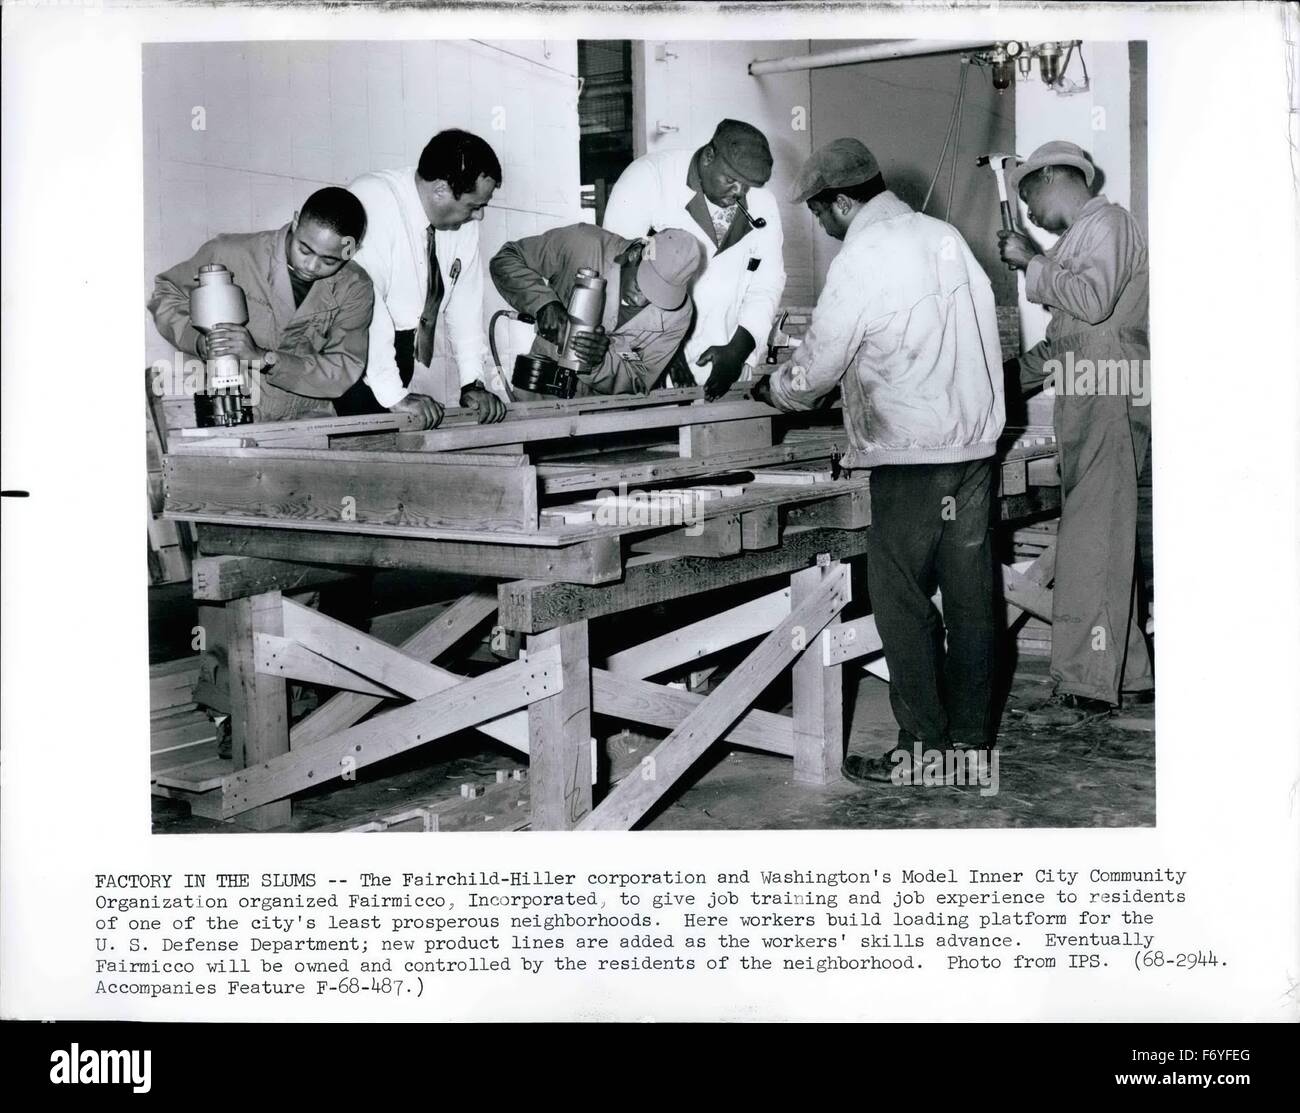 1968 - Factorty in the Slums -- The Fairchild-Hiller corporation and Washington's Model Inner City Community Organization organized Fairmicco, Incorporated to give job training and Job experience to residents of one of the city's least prosperous neighborhoods. Here workers build loading platform for the U. S. Defense Department; new product lines are added as the workers' skills advance. Eventually Fairmicco will be owned and controlled by the residents of the neighborhood. © Keystone Pictures USA/ZUMAPRESS.com/Alamy Live News Stock Photo